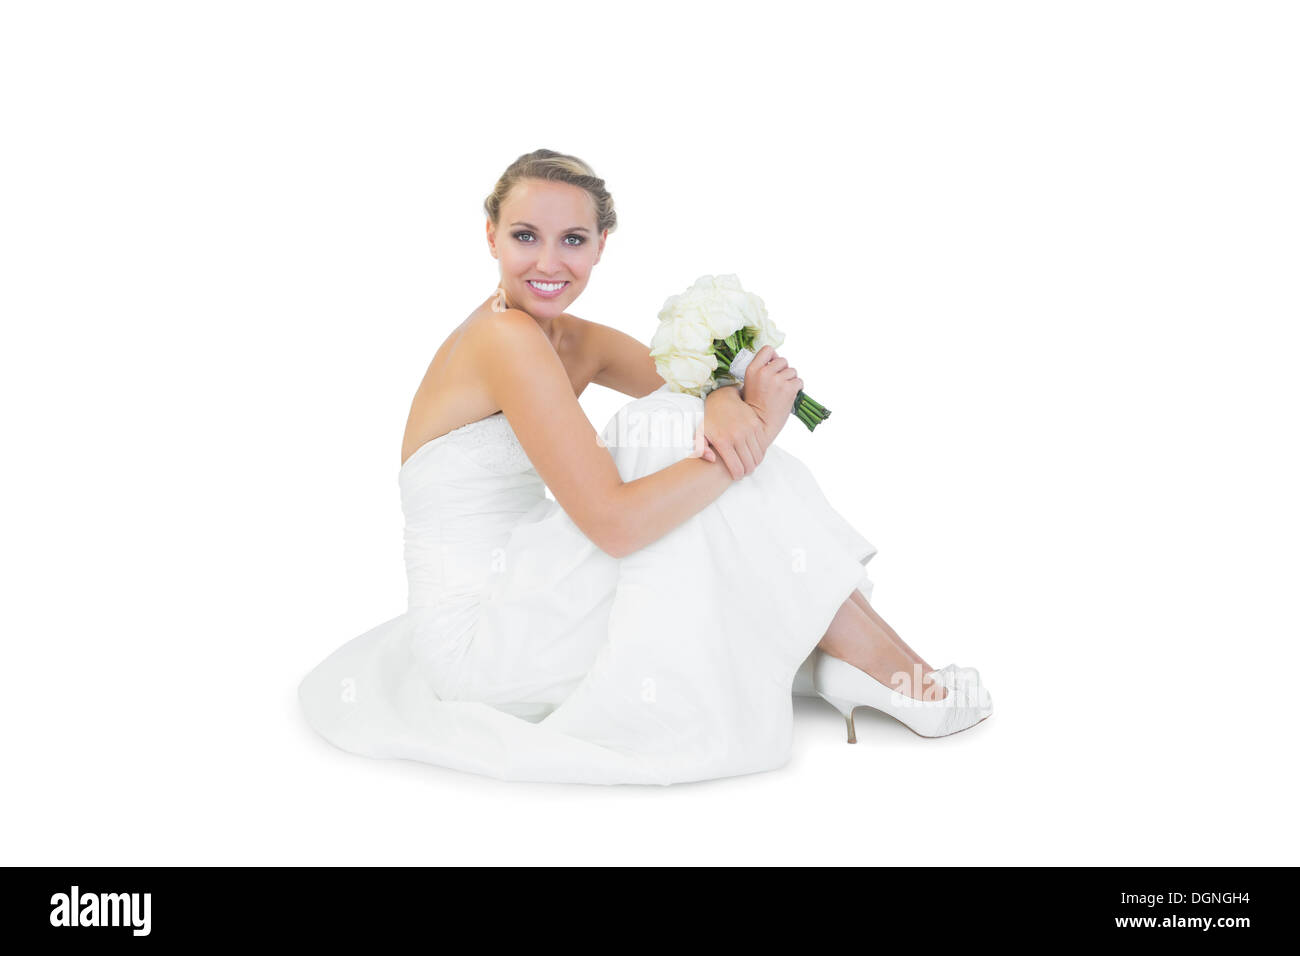 Pretty blonde bride sitting on floor holding a bouquet Stock Photo